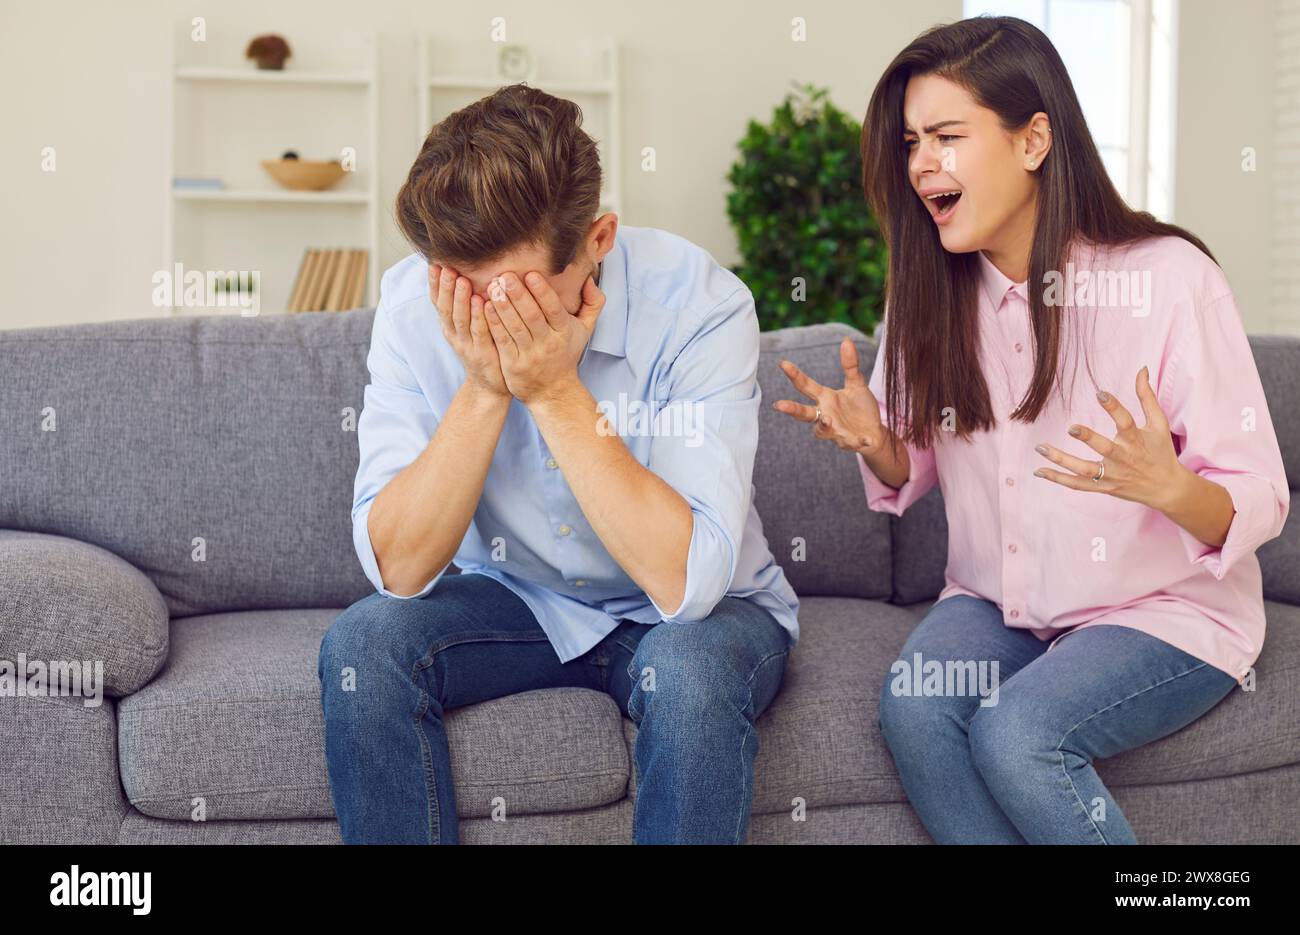 Woman shouts at man who covers his face with his hands, showing gesture of suffering or shame. Stock Photo